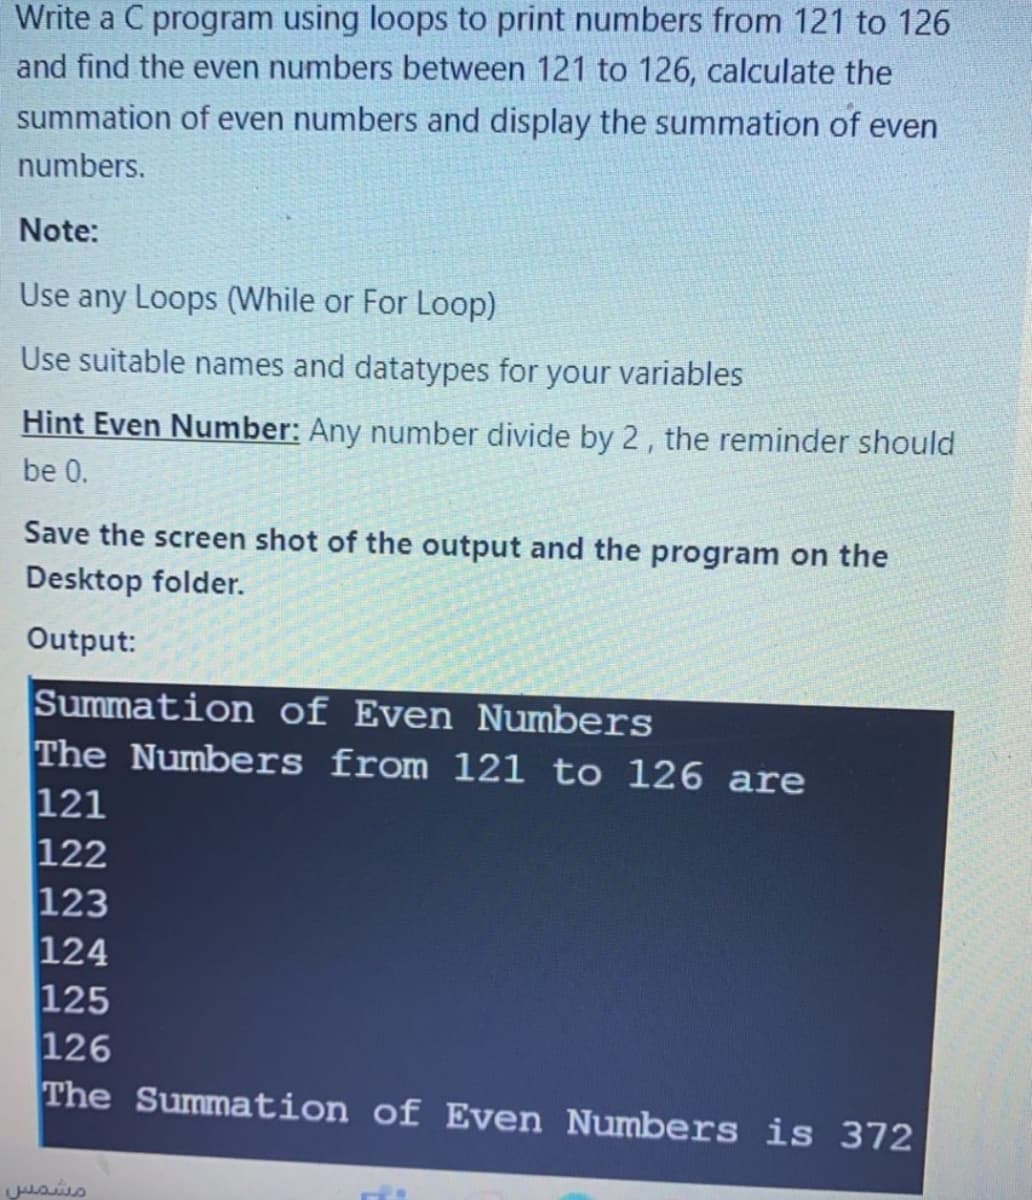 Write a C program using loops to print numbers from 121 to 126
and find the even numbers between 121 to 126, calculate the
summation of even numbers and display the summation of even
numbers.
Note:
Use any Loops (While or For Loop)
Use suitable names and datatypes for your variables
Hint Even Number: Any number divide by 2, the reminder should
be 0.
Save the screen shot of the output and the program on the
Desktop folder.
Output:
Summation of Even Numbers
The Numbers from 121 to 126 are
121
122
123
124
125
126
The Summation of Even Numbers is 372
مشمس
